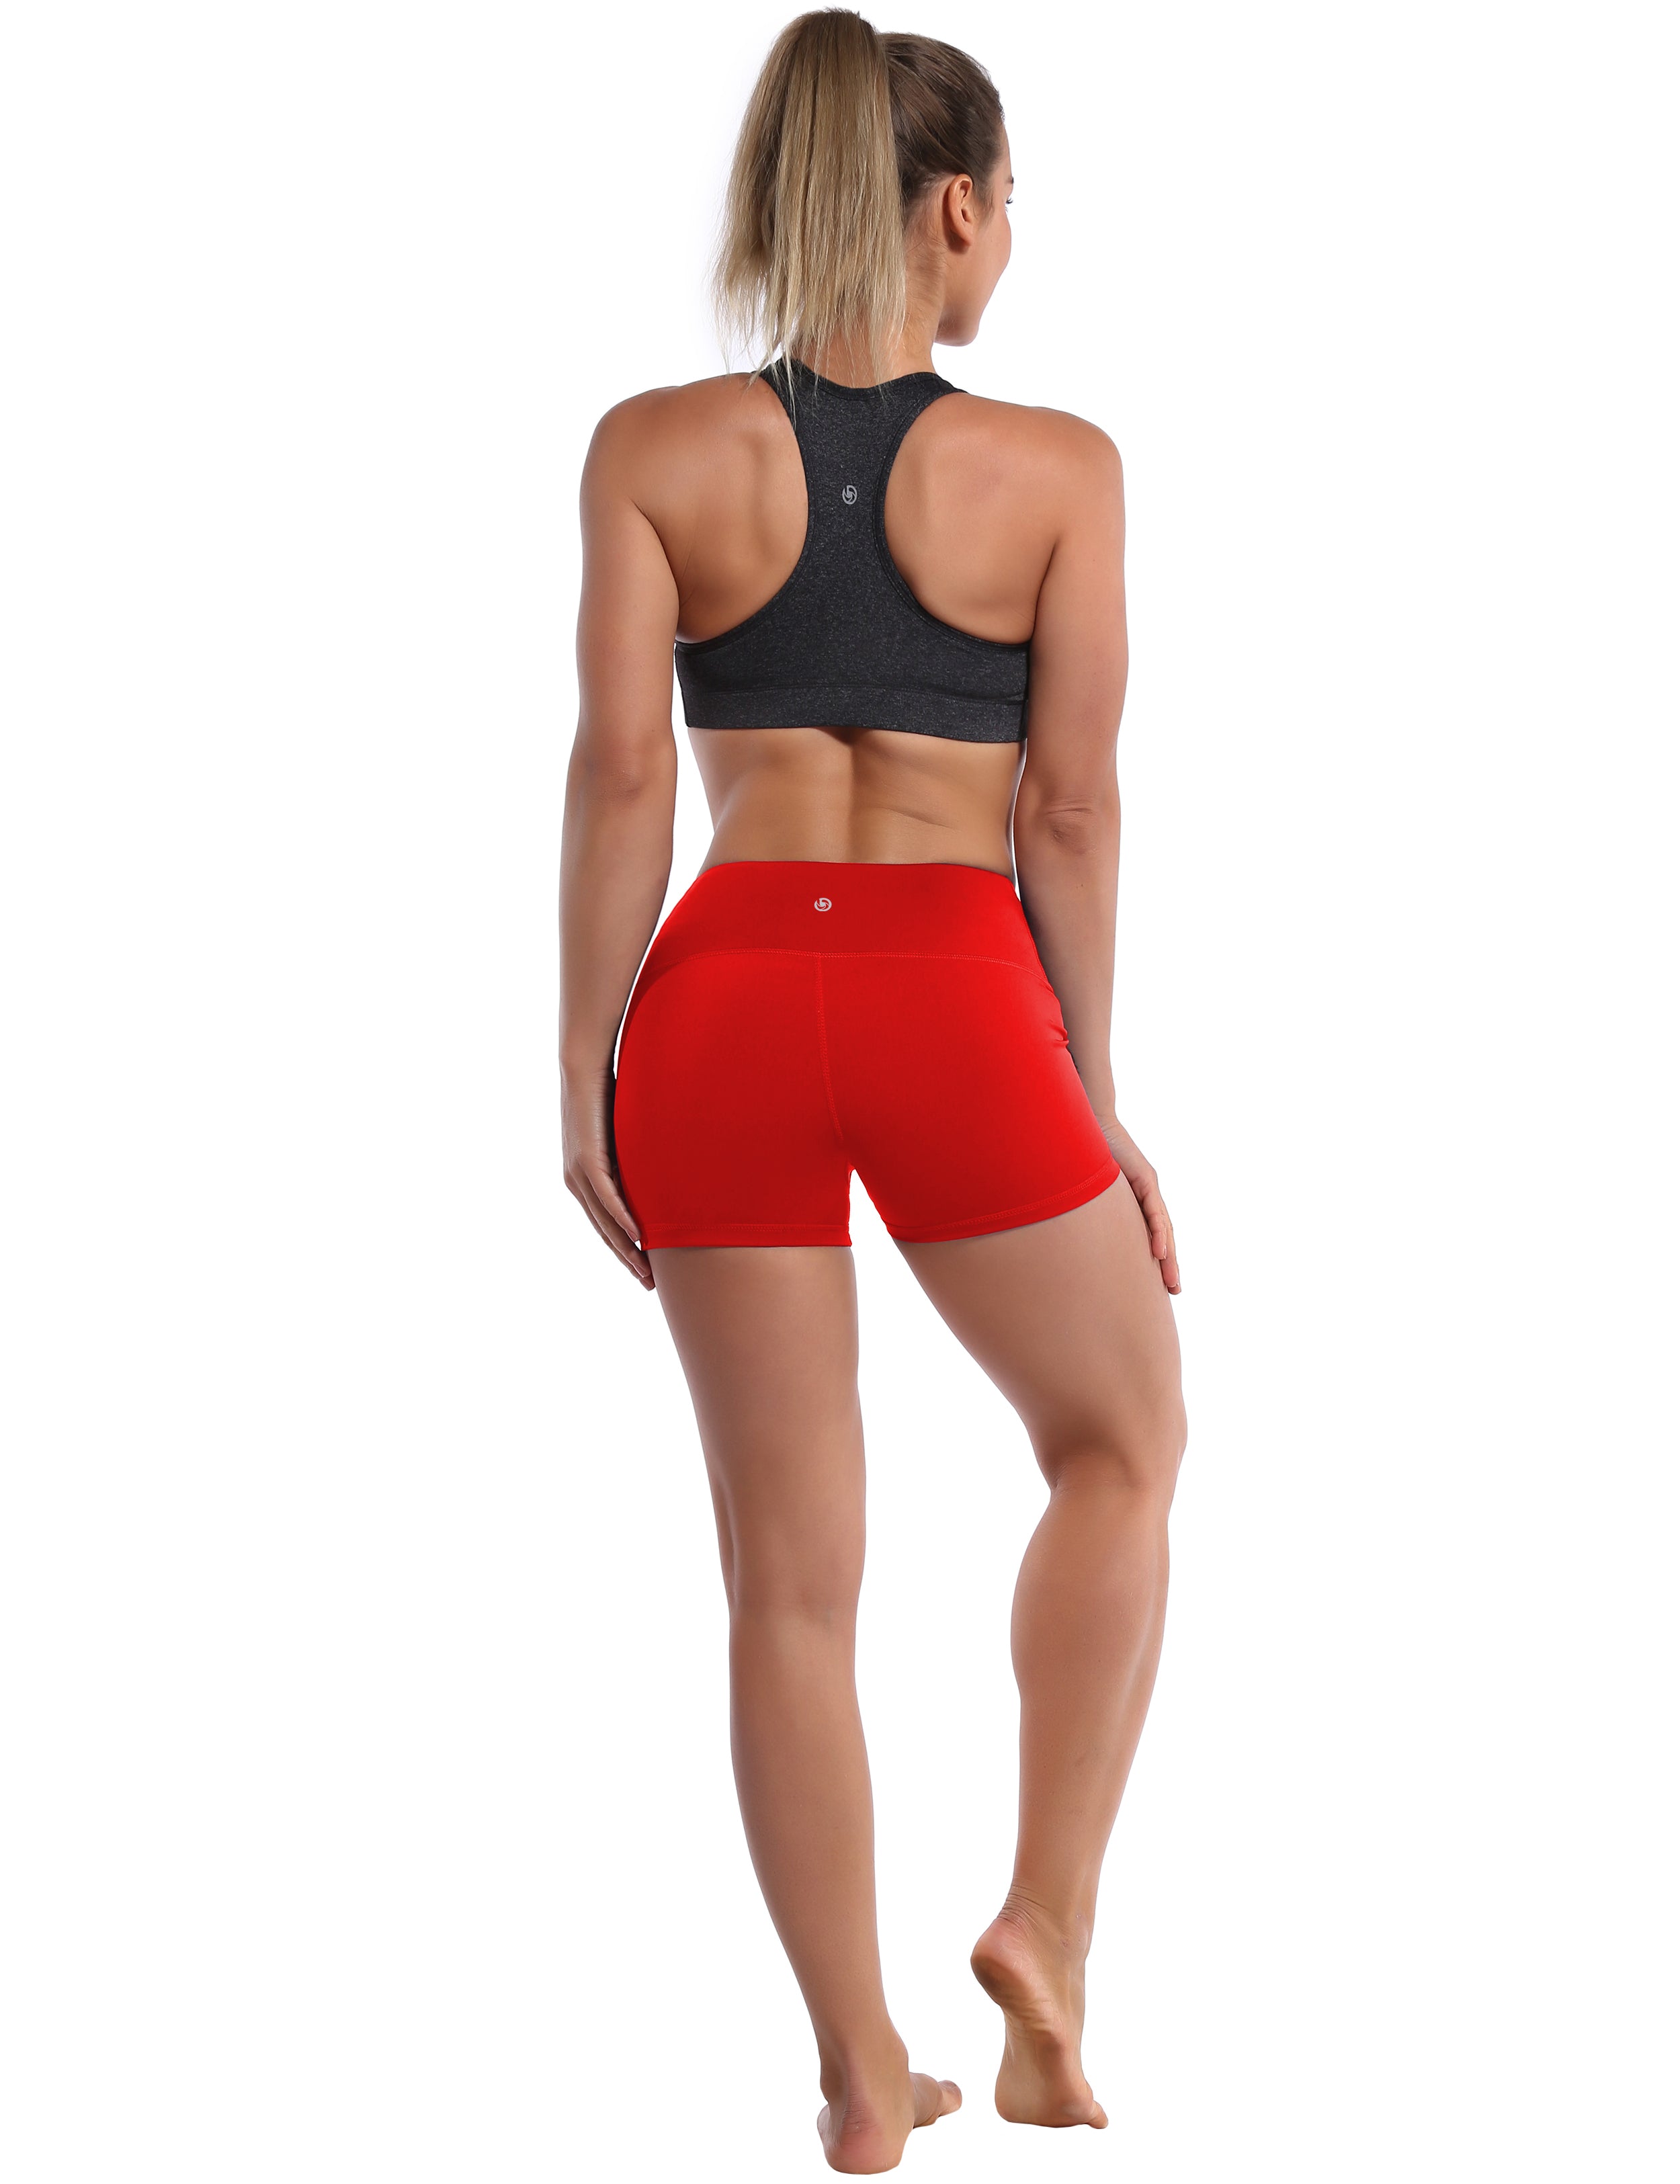 2.5" Yoga Shorts scarlet Softest-ever fabric High elasticity High density 4-way stretch Fabric doesn't attract lint easily No see-through Moisture-wicking Machine wash 75% Nylon, 25% Spandex